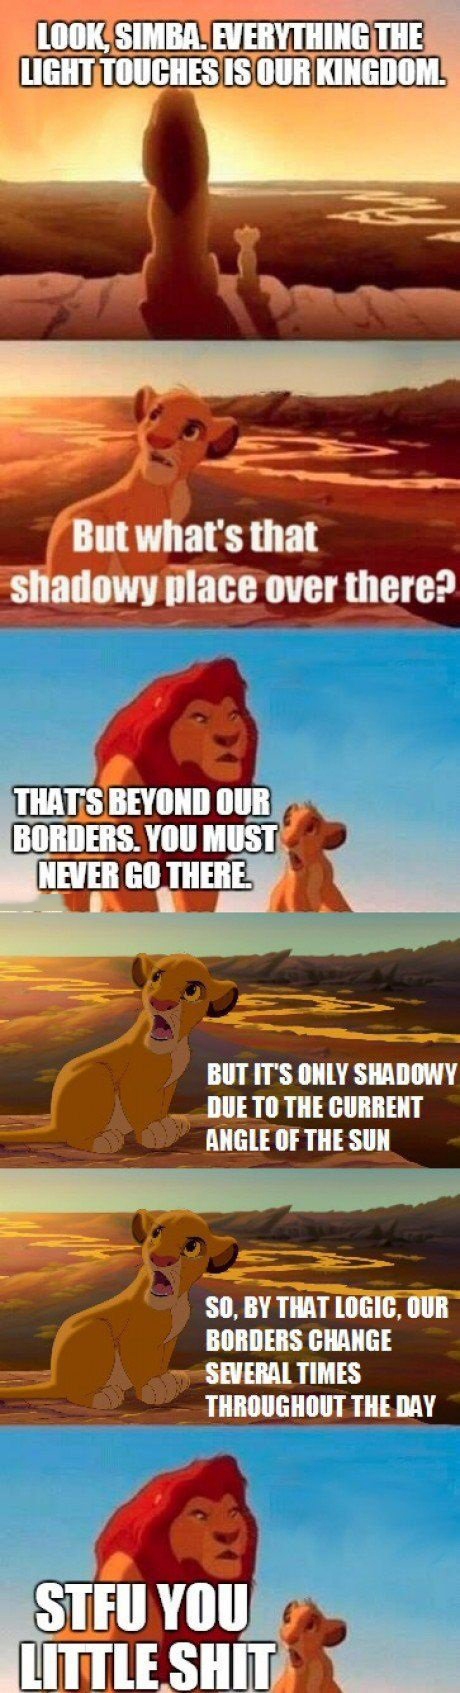 lion king meme - Look. Simba. Everything The Light Touches Is Our Kingdom But what's that shadowy place over there? Thats Beyond Our Borders You Must Never Go There But Its Only Shadowy Due To The Gesut Angle Of The Sun 50. By That Logic Cu Borders Change